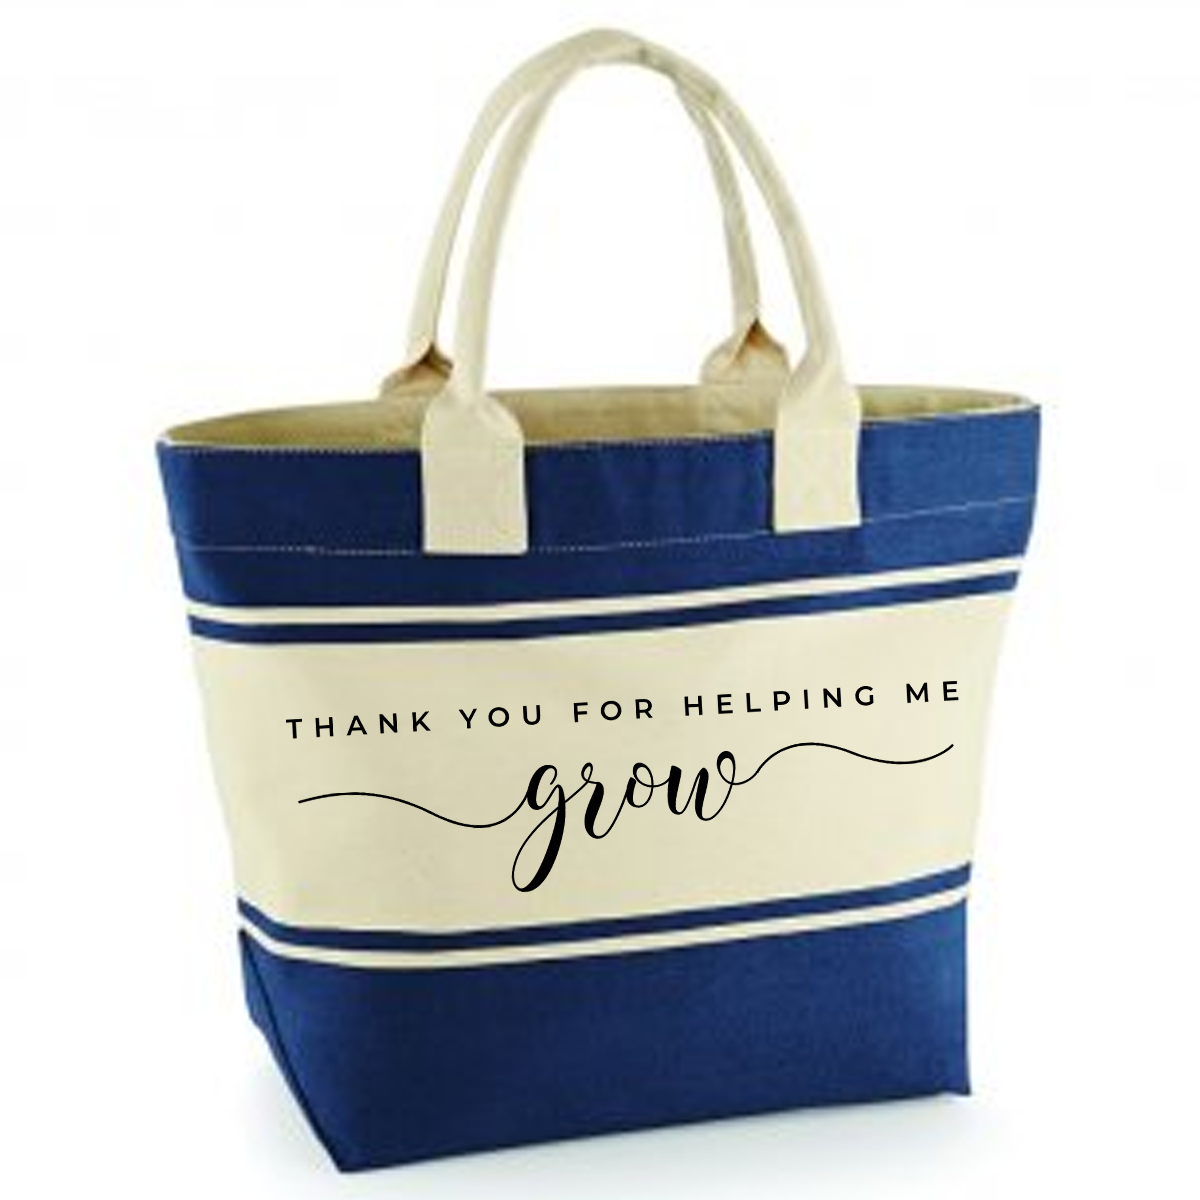 Thank you for helping me grow - Navy/Cream Canvas Deck Bag